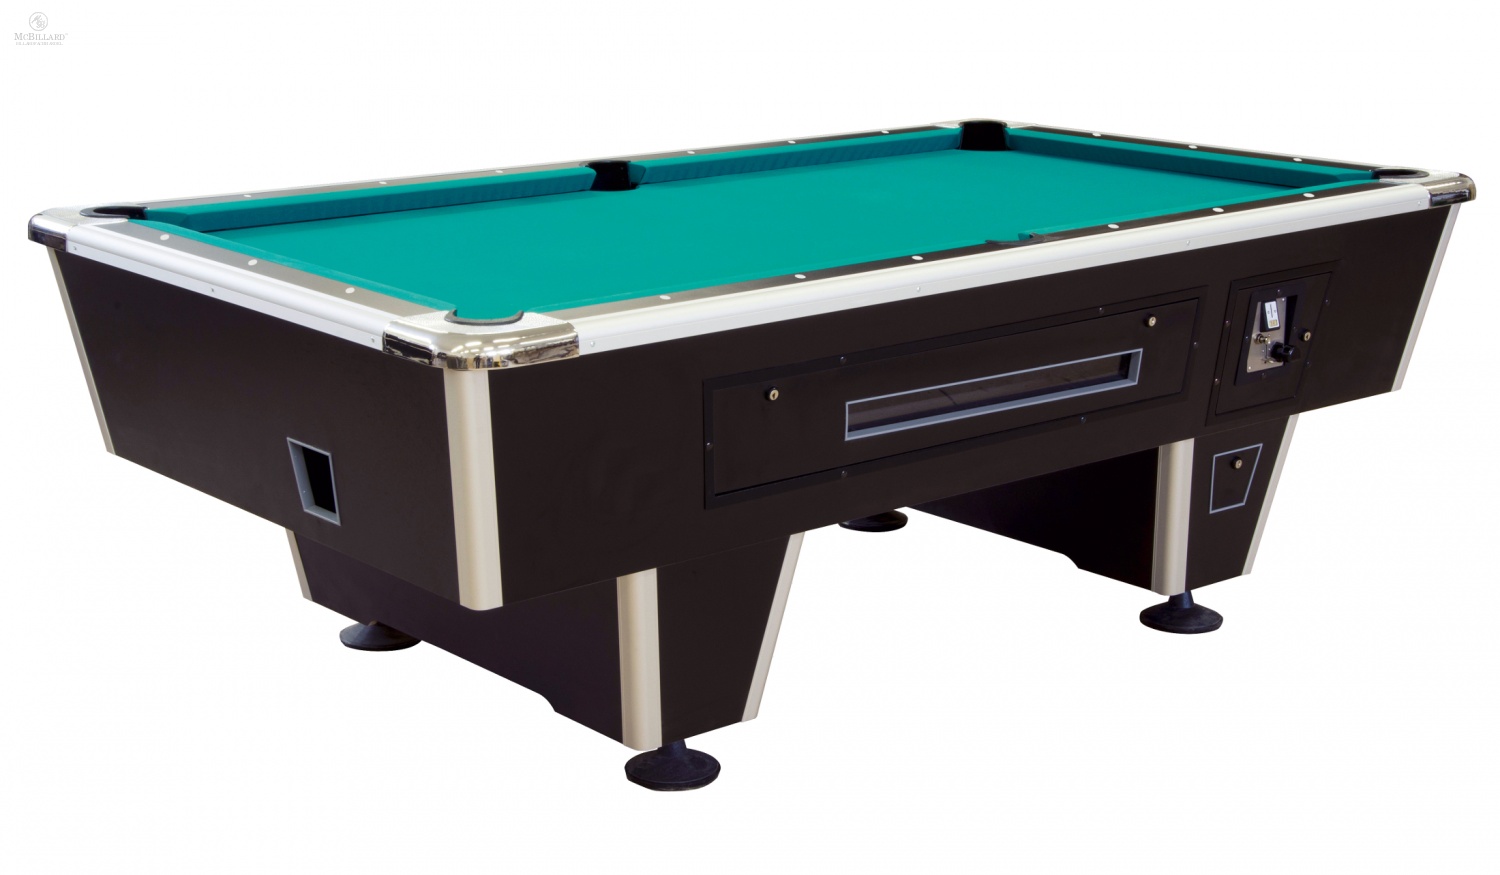 Pool Billiard Table - Orlando - with coin slot, 8 ft.